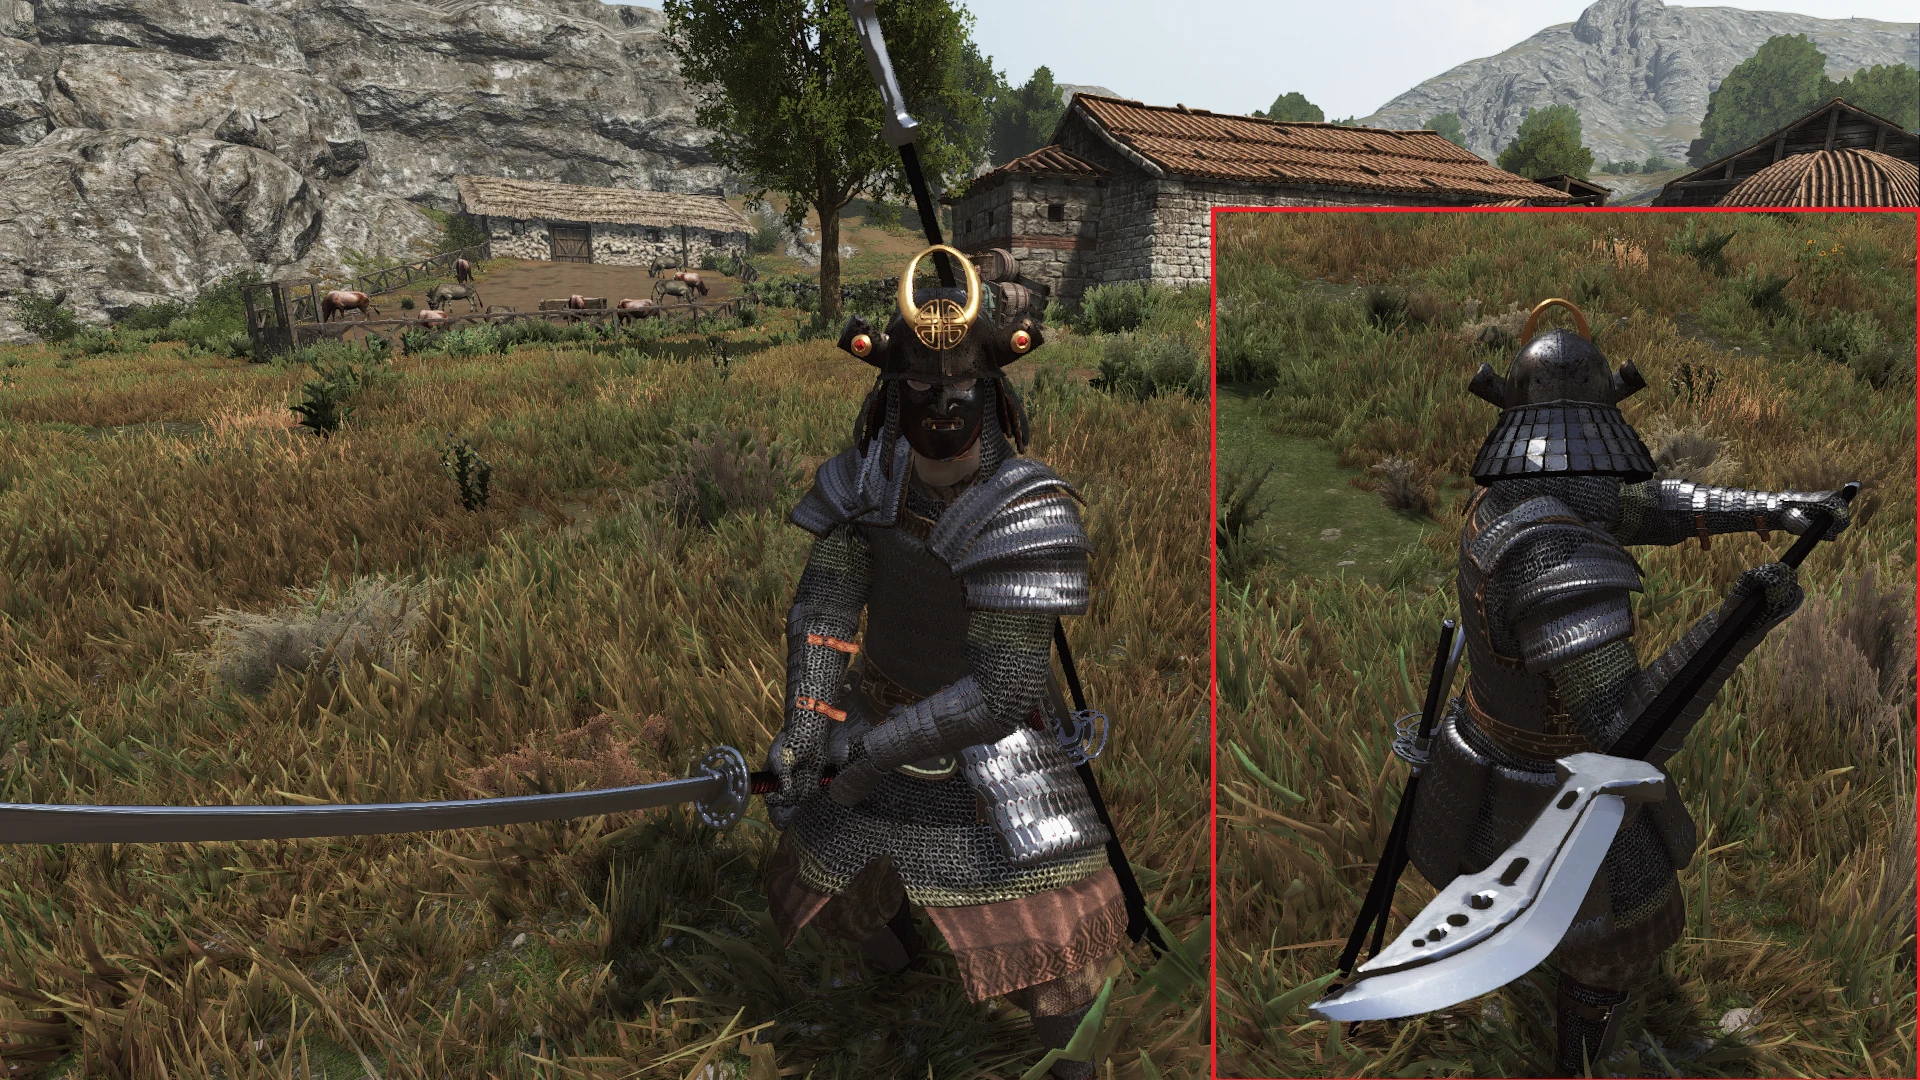 how to install mount and blade bannerlord mods